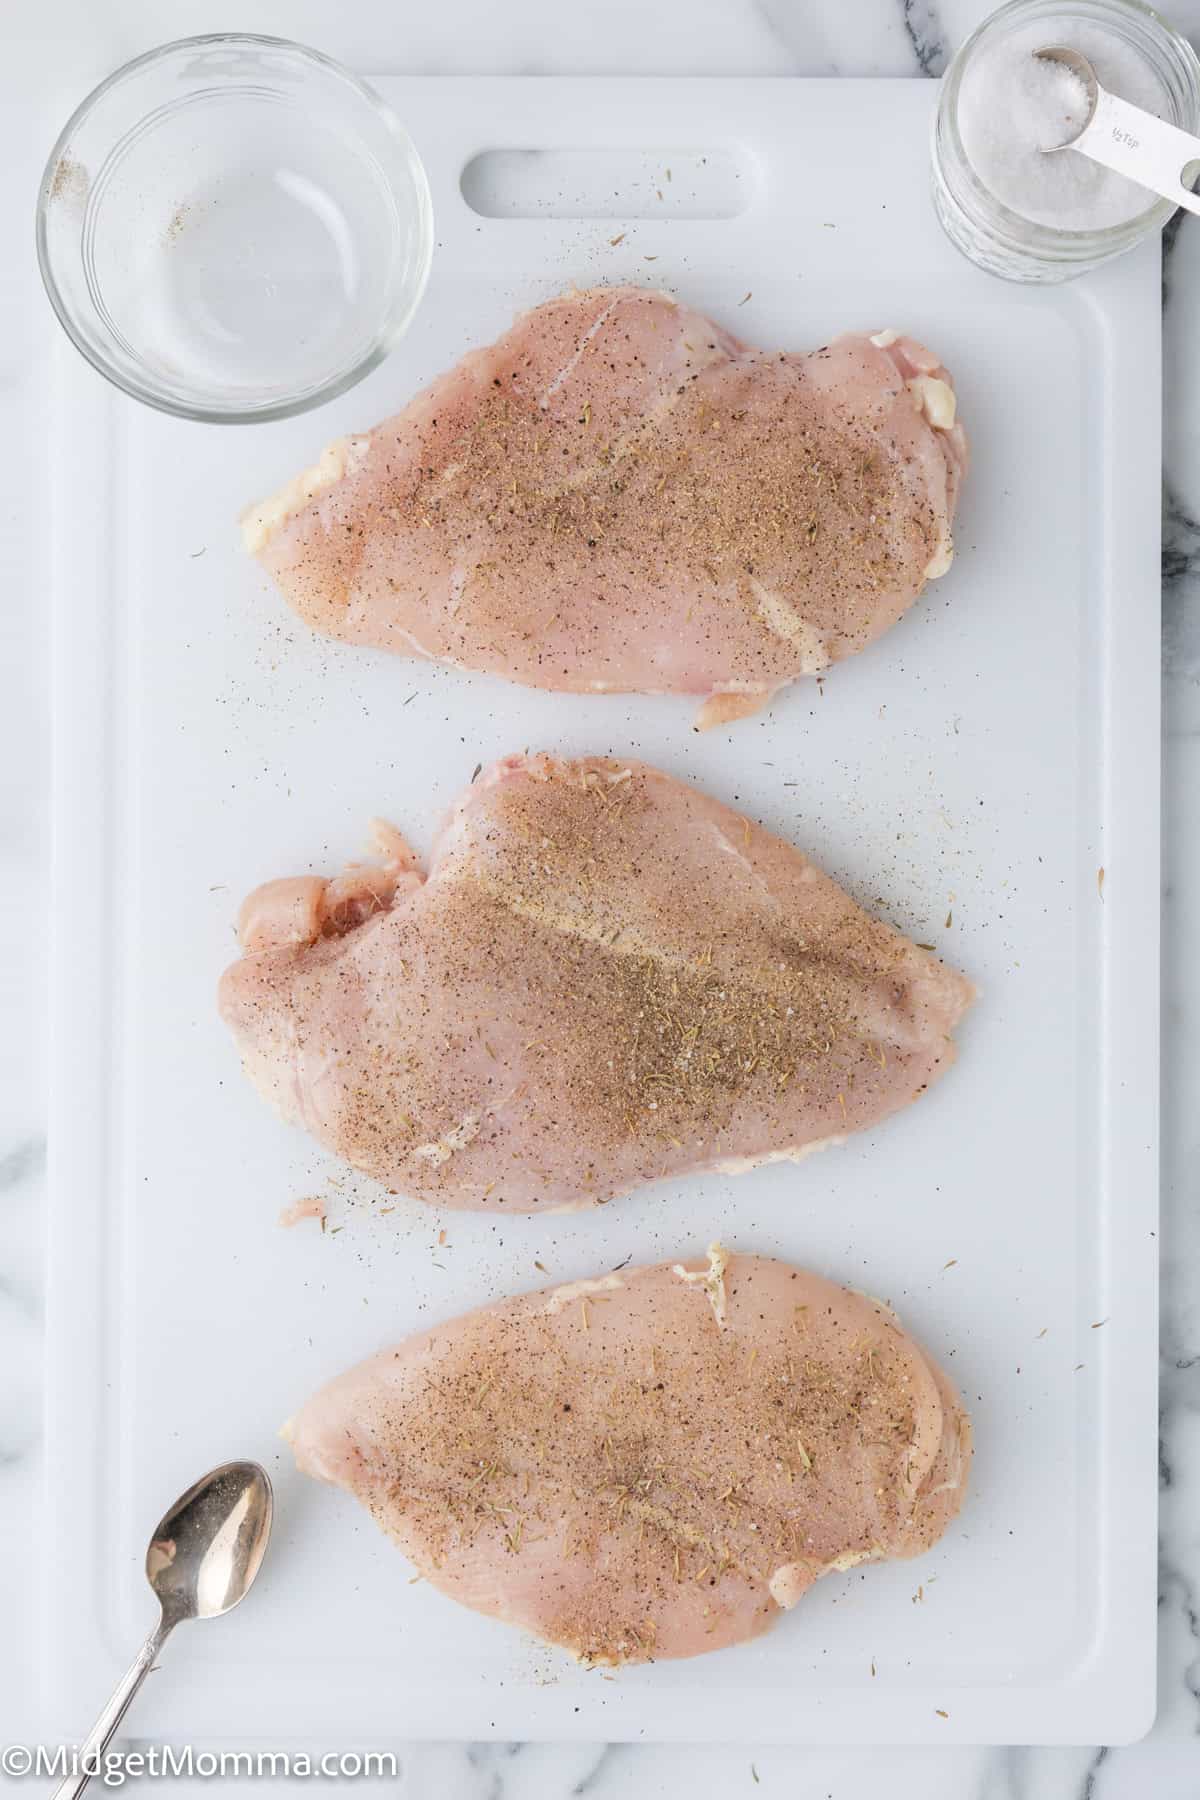 Three raw chicken breasts seasoned with spices are placed on a white cutting board. A glass bowl, a measuring spoon, and a salt shaker are also visible on the board.